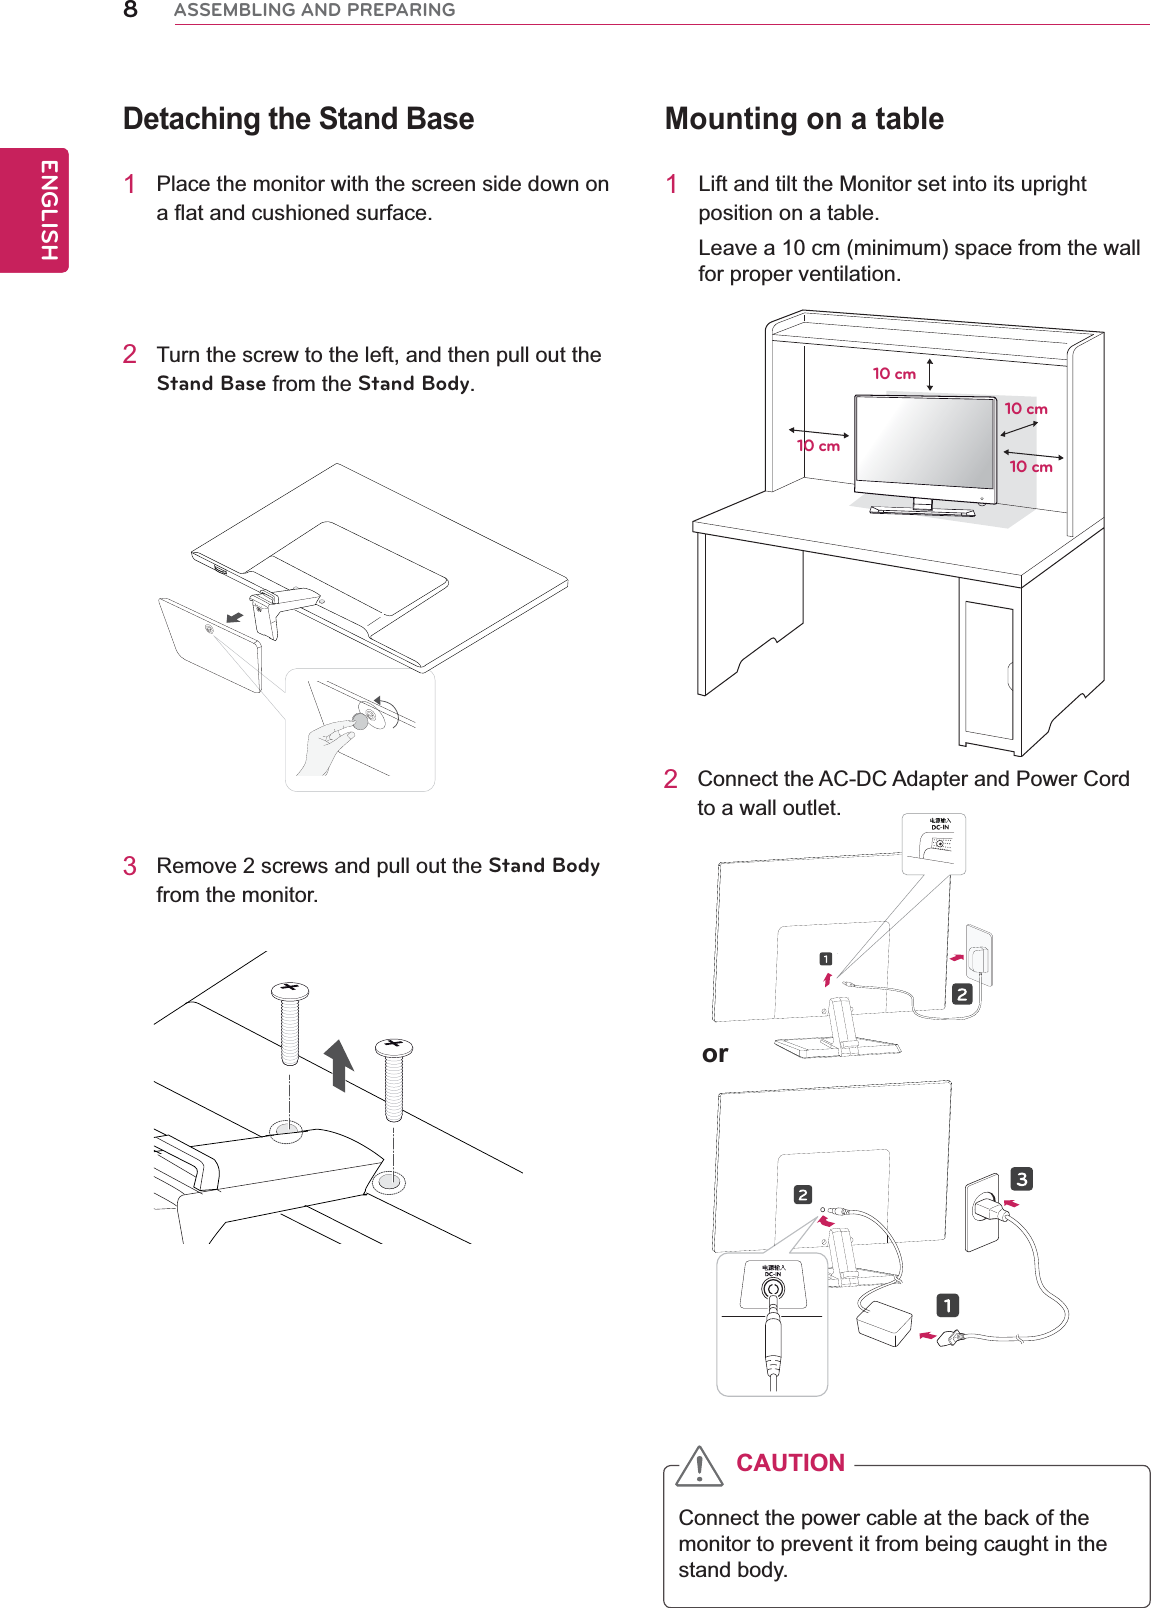 8ENGENGLISHASSEMBLING AND PREPARINGMounting on a table1  Lift and tilt the Monitor set into its upright position on a table.Leave a 10 cm (minimum) space from the wall for proper ventilation.2  Connect the AC-DC Adapter and Power Cord to a wall outlet.10 cm10 cm10 cm10 cmor 2  Turn the screw to the left, and then pull out the Stand Base from the Stand Body.Detaching the Stand Base1  Place the monitor with the screen side down on a flat and cushioned surface.3  Remove 2 screws and pull out the Stand Body from the monitor.Connect the power cable at the back of the monitor to prevent it from being caught in the stand body.CAUTION